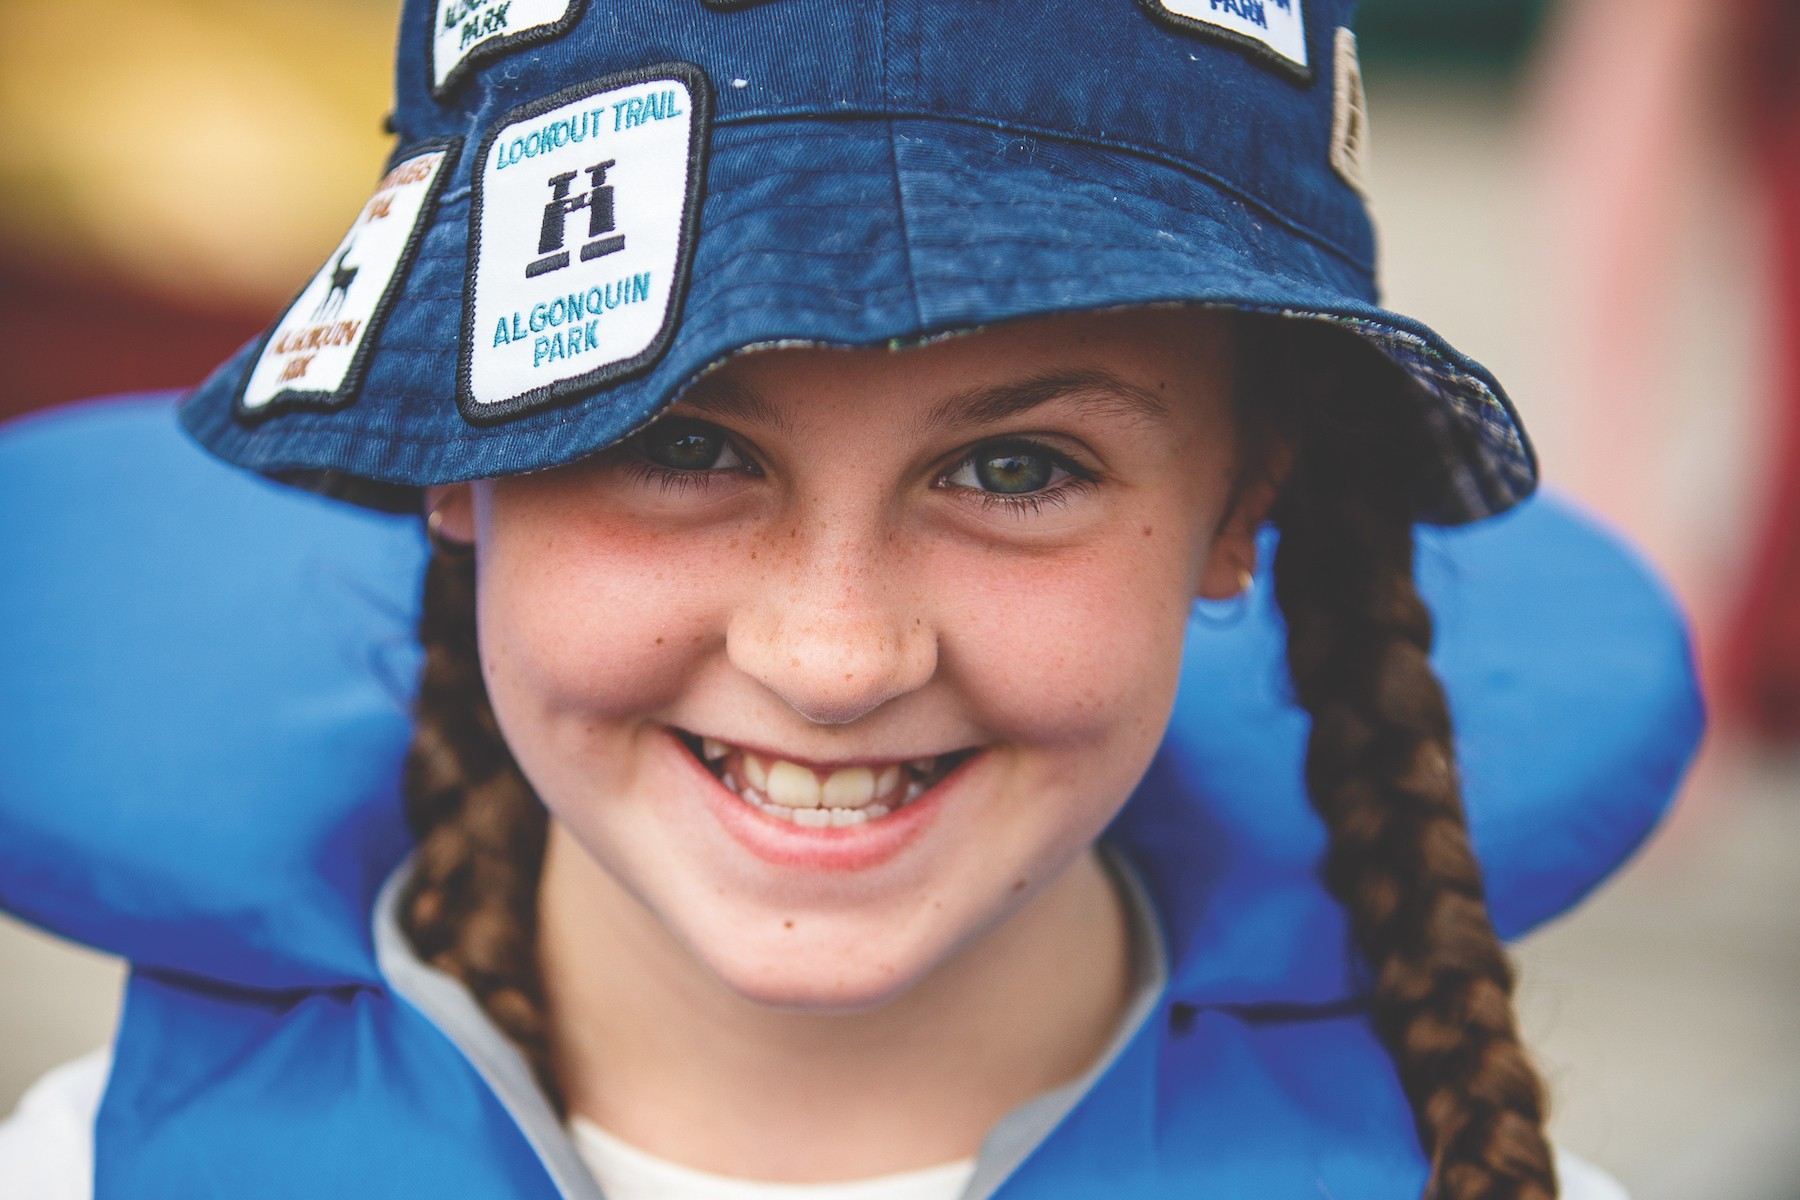 A young girl with braids is wearing a blue personal flotation device (PFD) and a blue bucket hat that is decorated with various sew-on patches depicting different trails in Algonquin Park. She is smiling and looking straight at the camera.